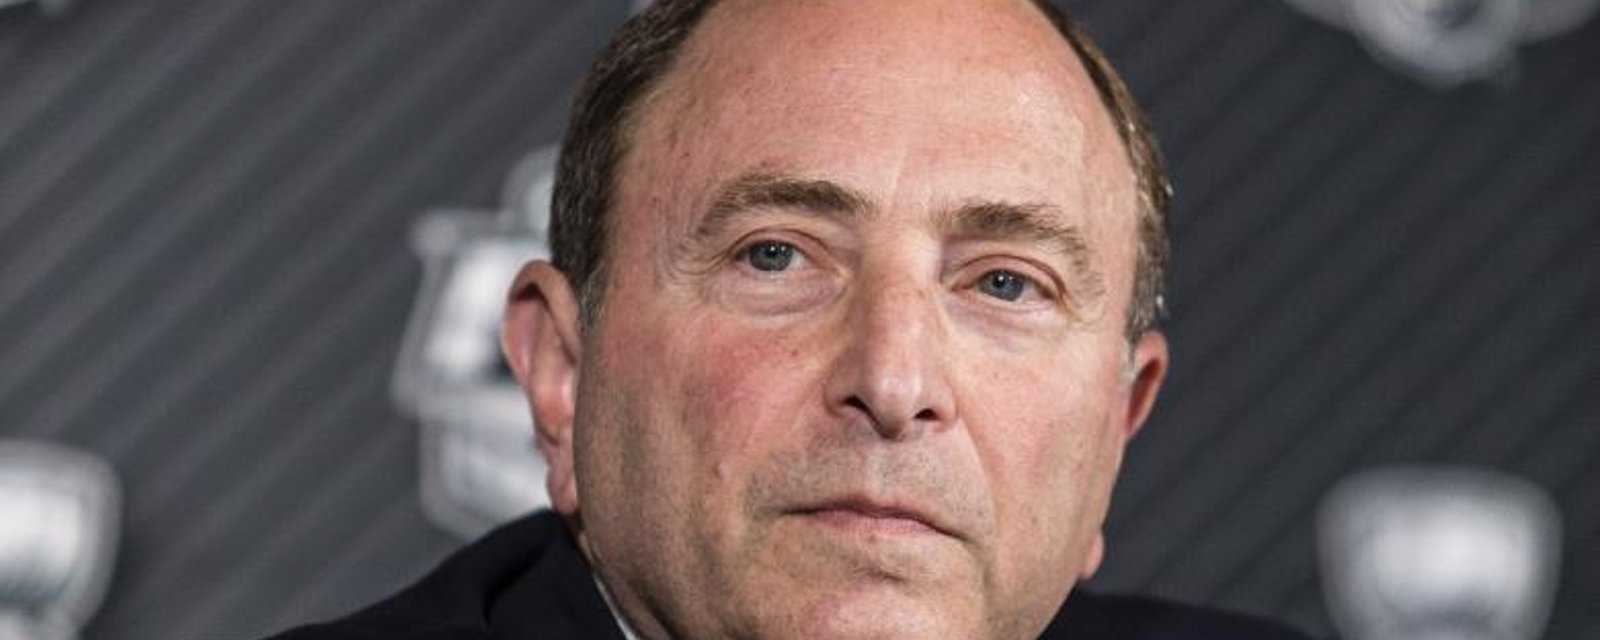 NHL Commissioner Gary Bettman just made a HUGE mistake.